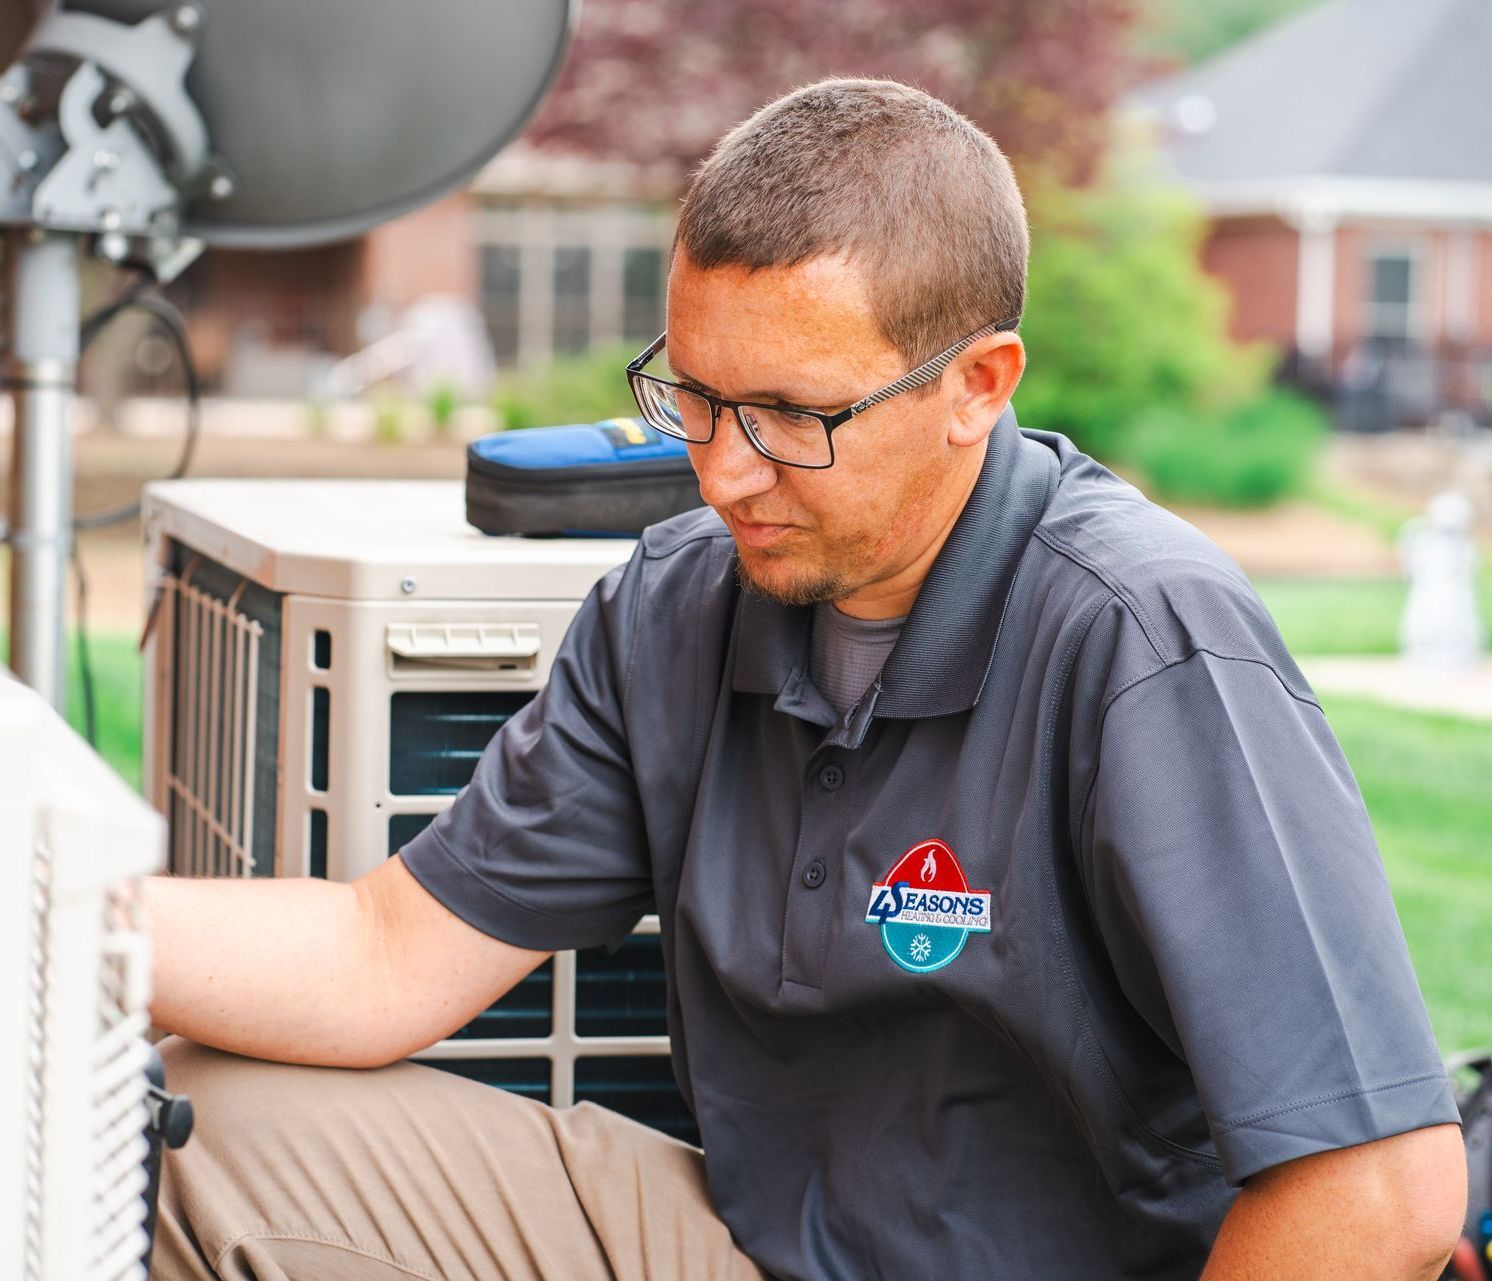 A man wearing glasses is working on an air conditioner outside.